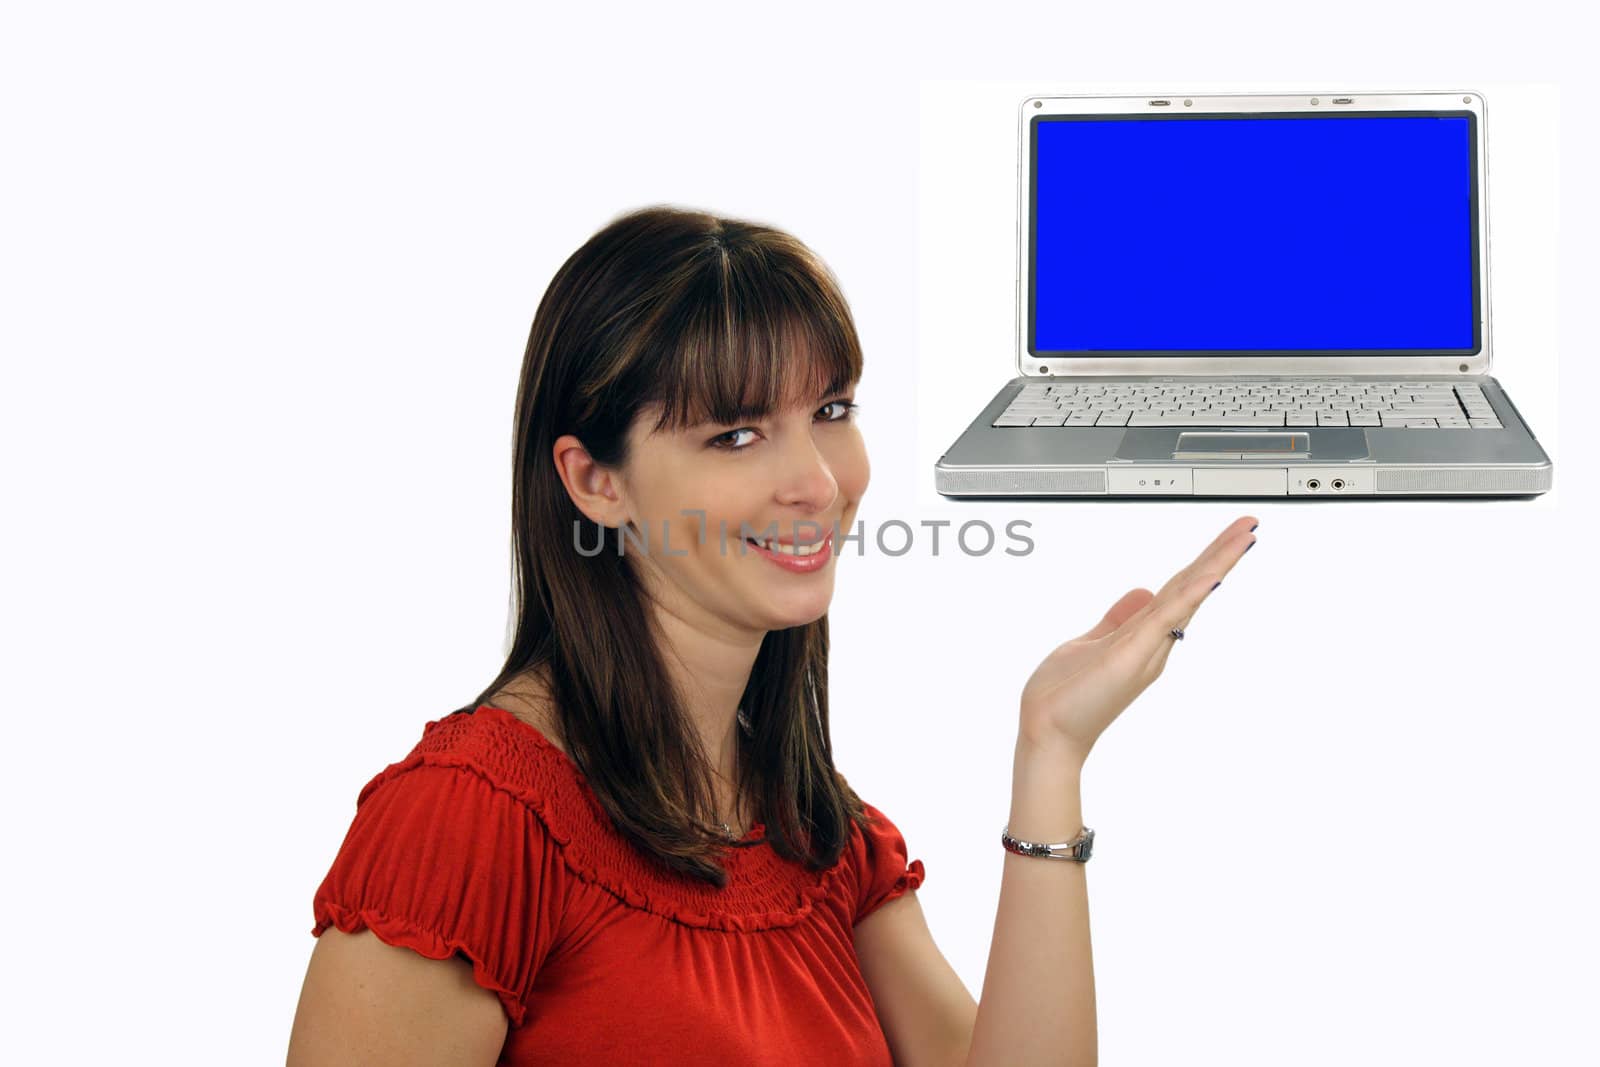 A lovely young brunette hostess with a captivating smile, looks directly at the viewer while pointing to a laptop computer which displays a blank blue screen.